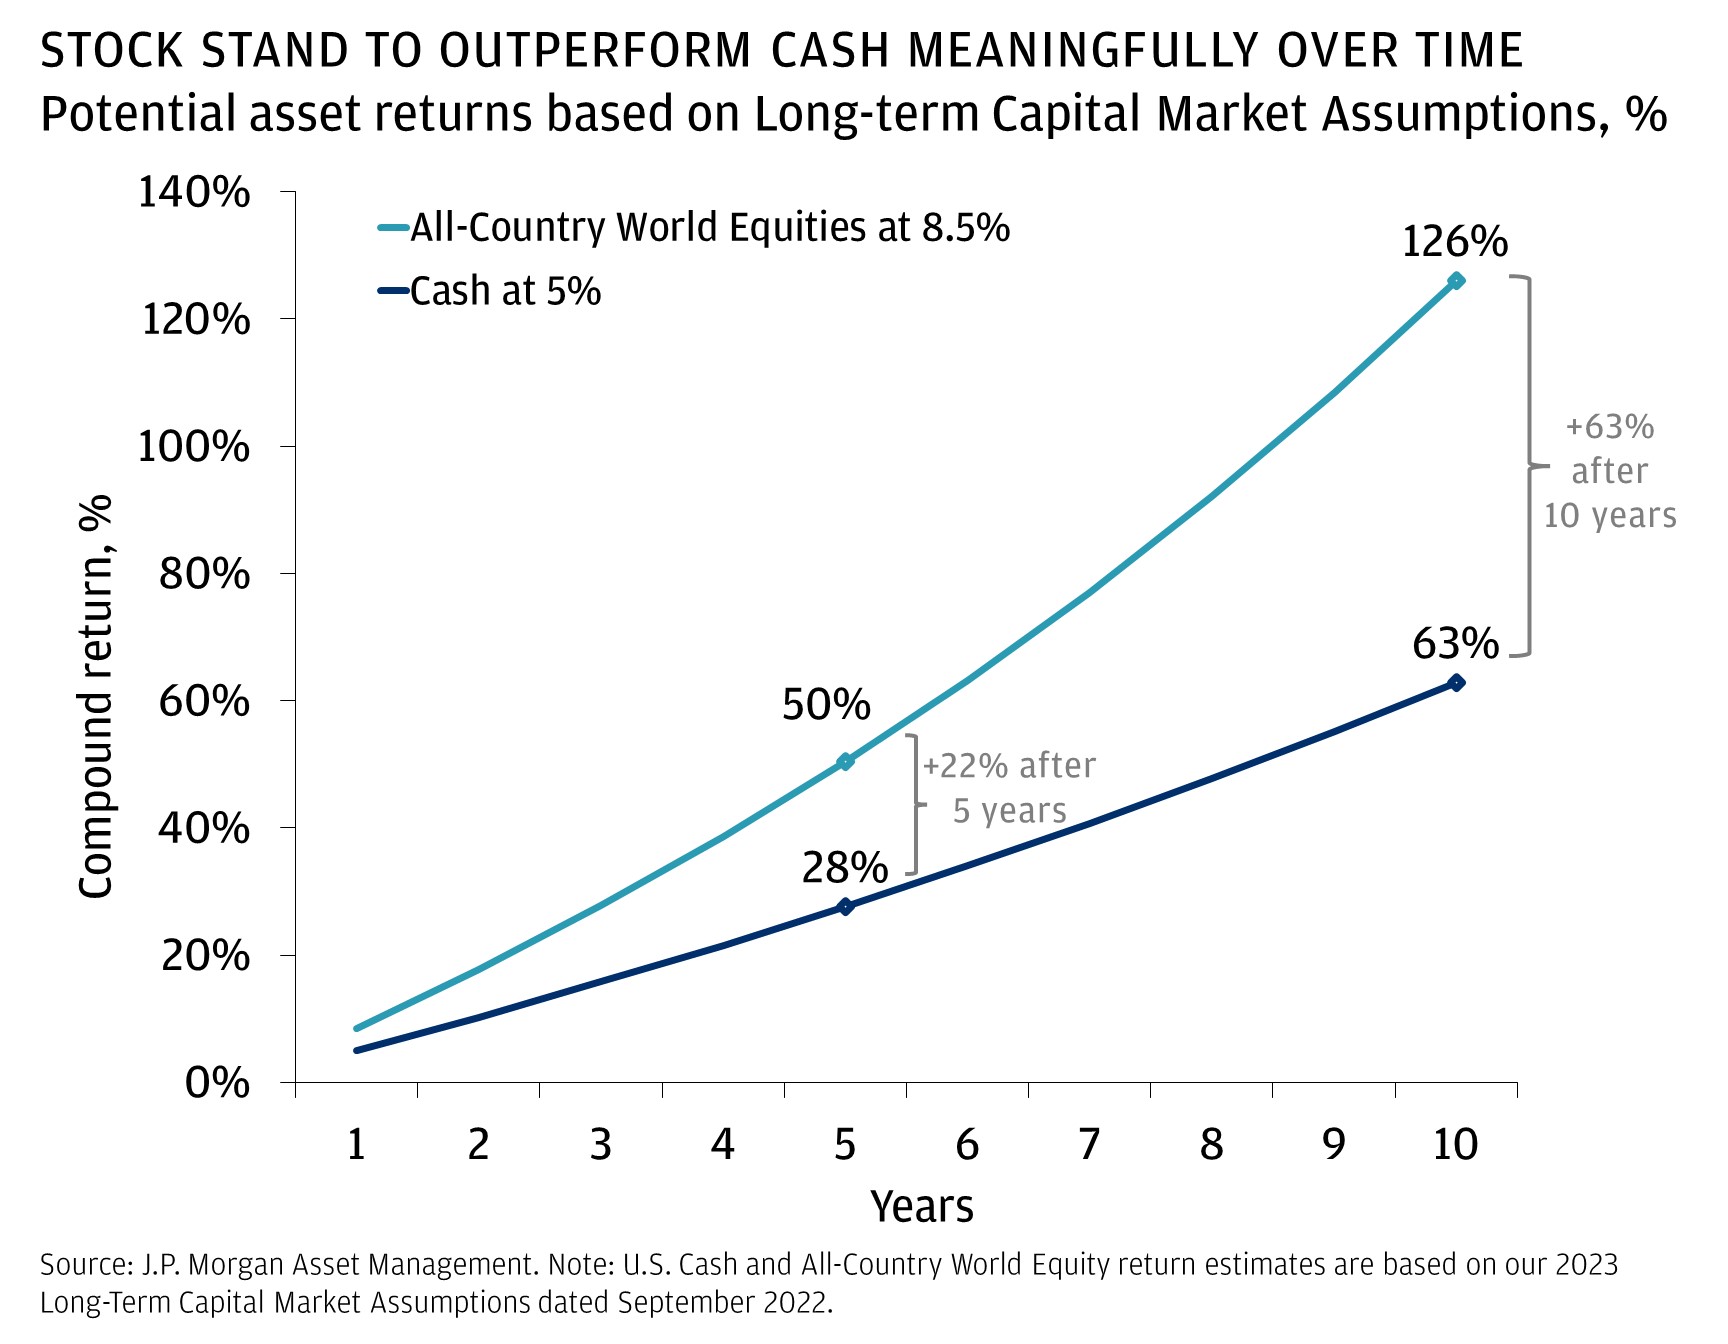 STOCK STAND TO OUTPERFORM CASH MEANINGFULLY OVER TIME